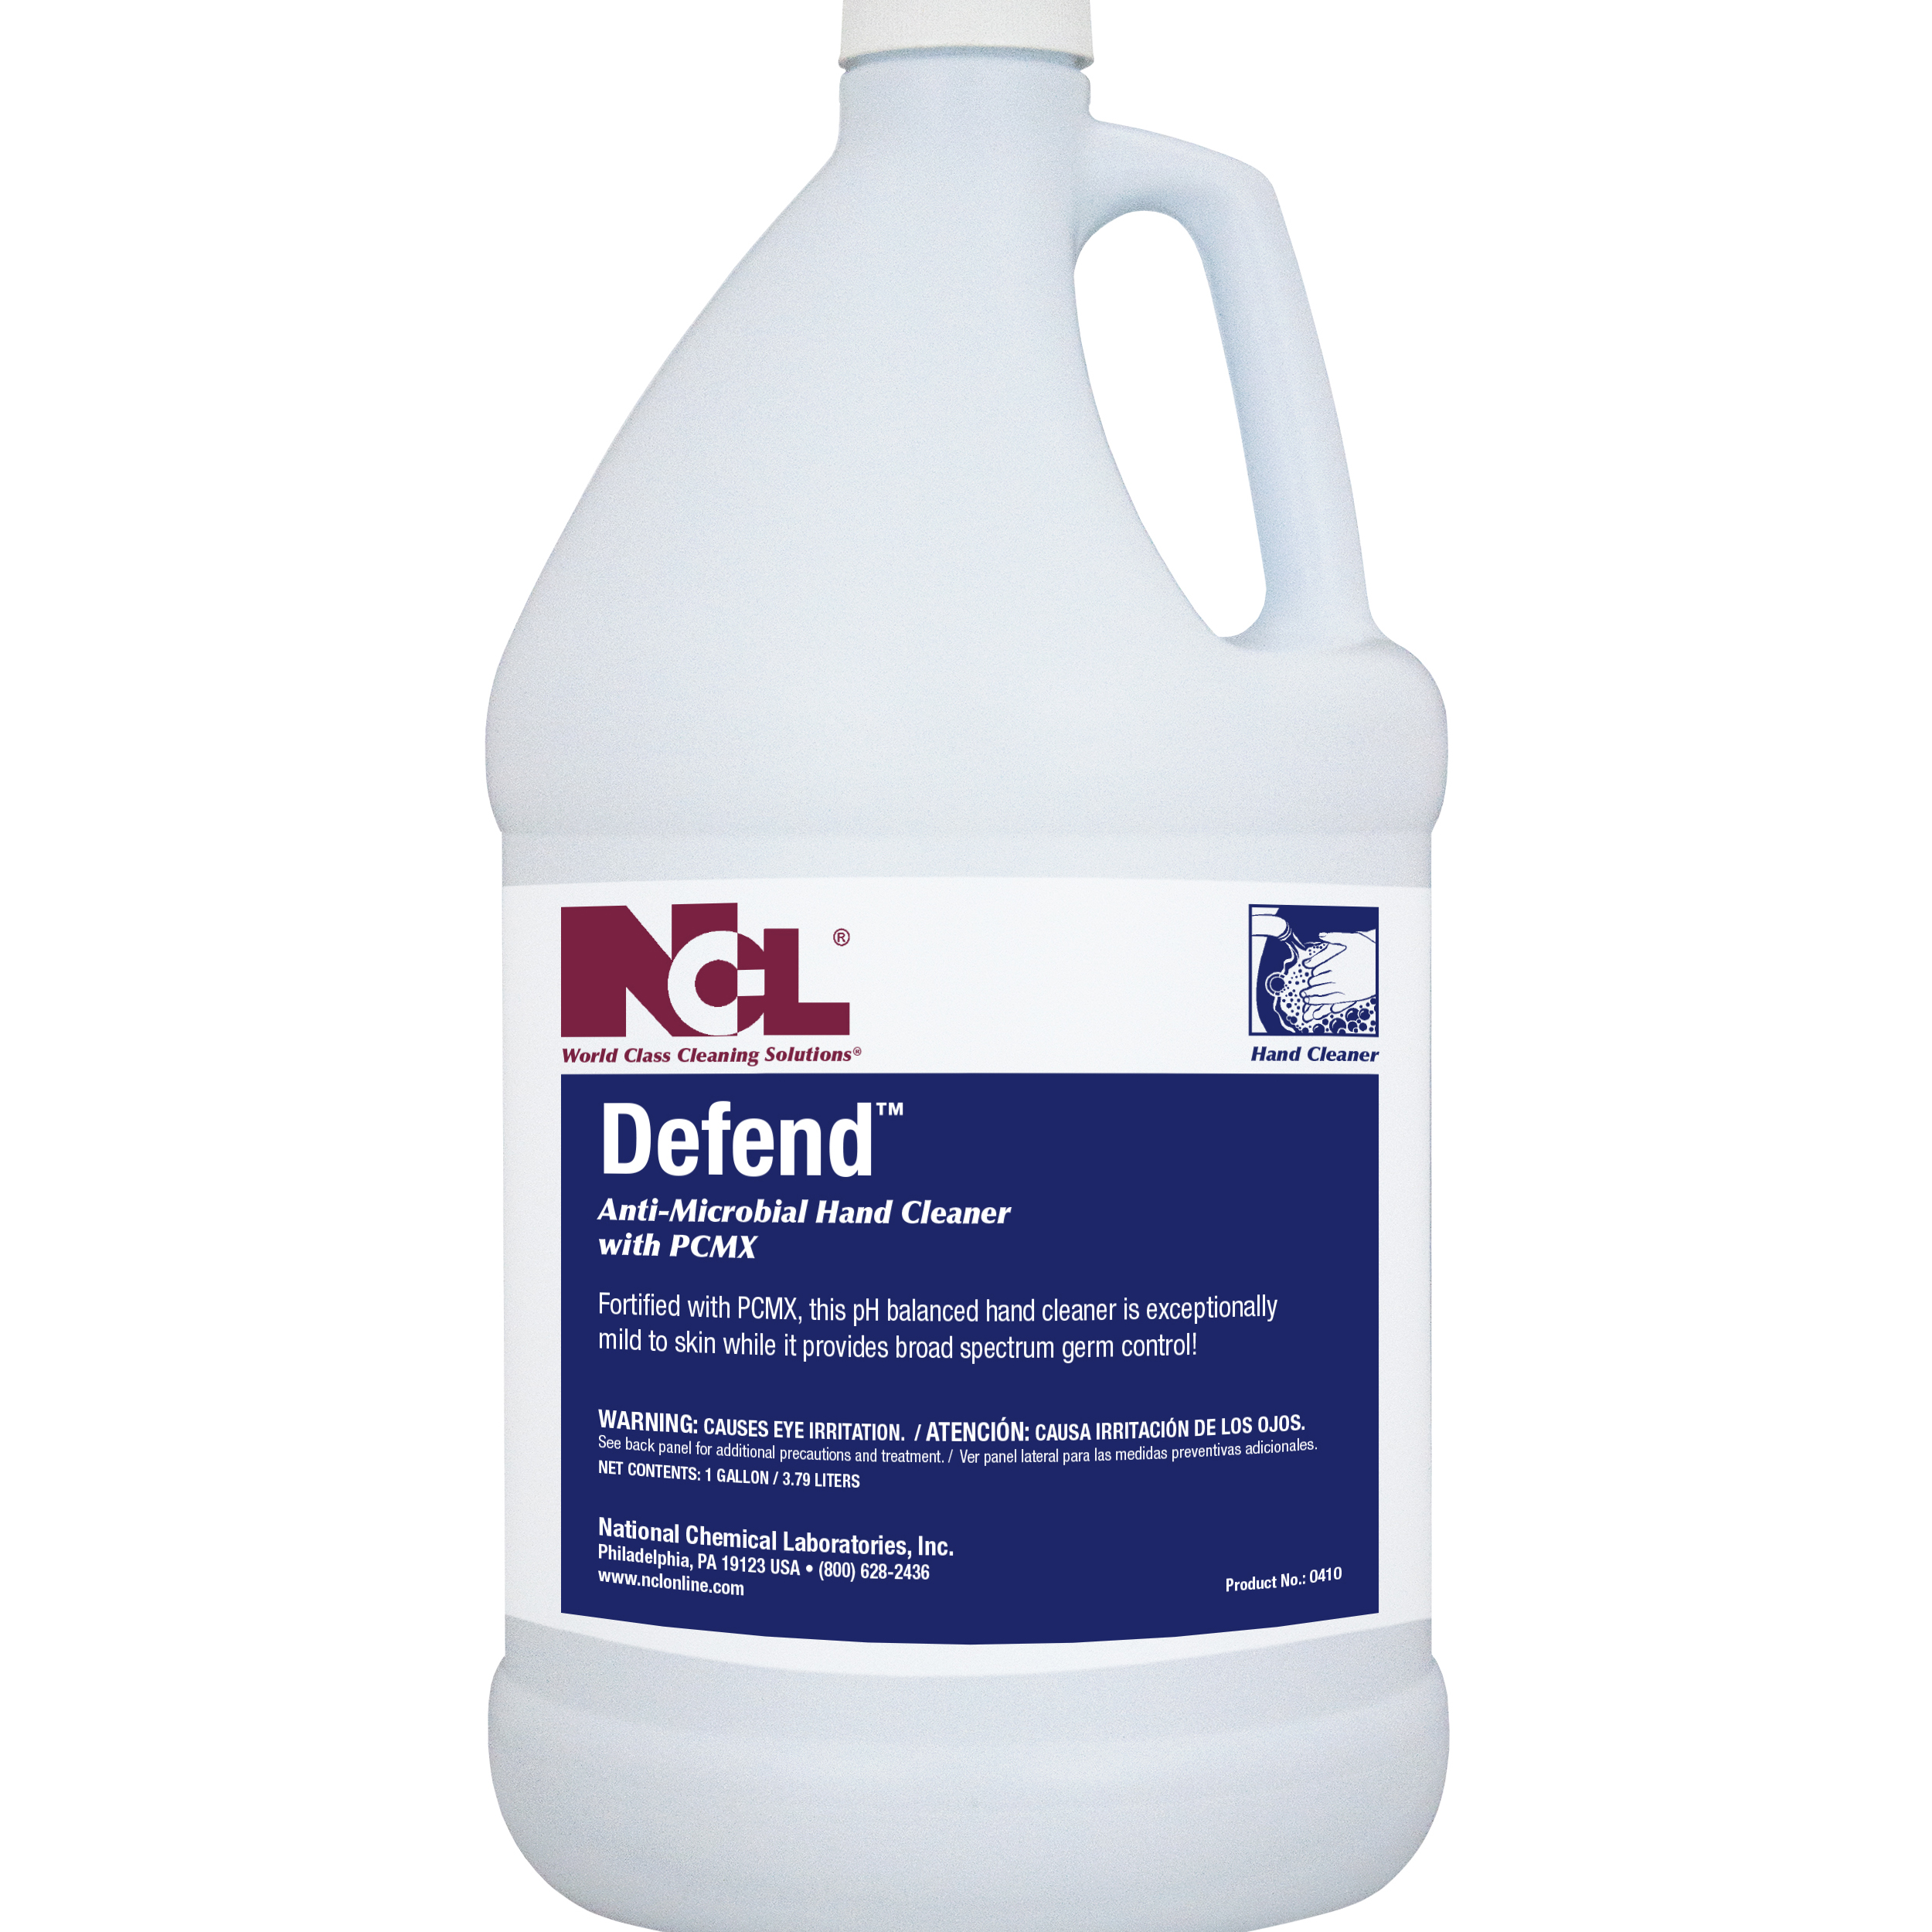  DEFEND Antimicrobial Hand Cleaner with Triclosan 4/1 Gal. Case (NCL0410-29) 